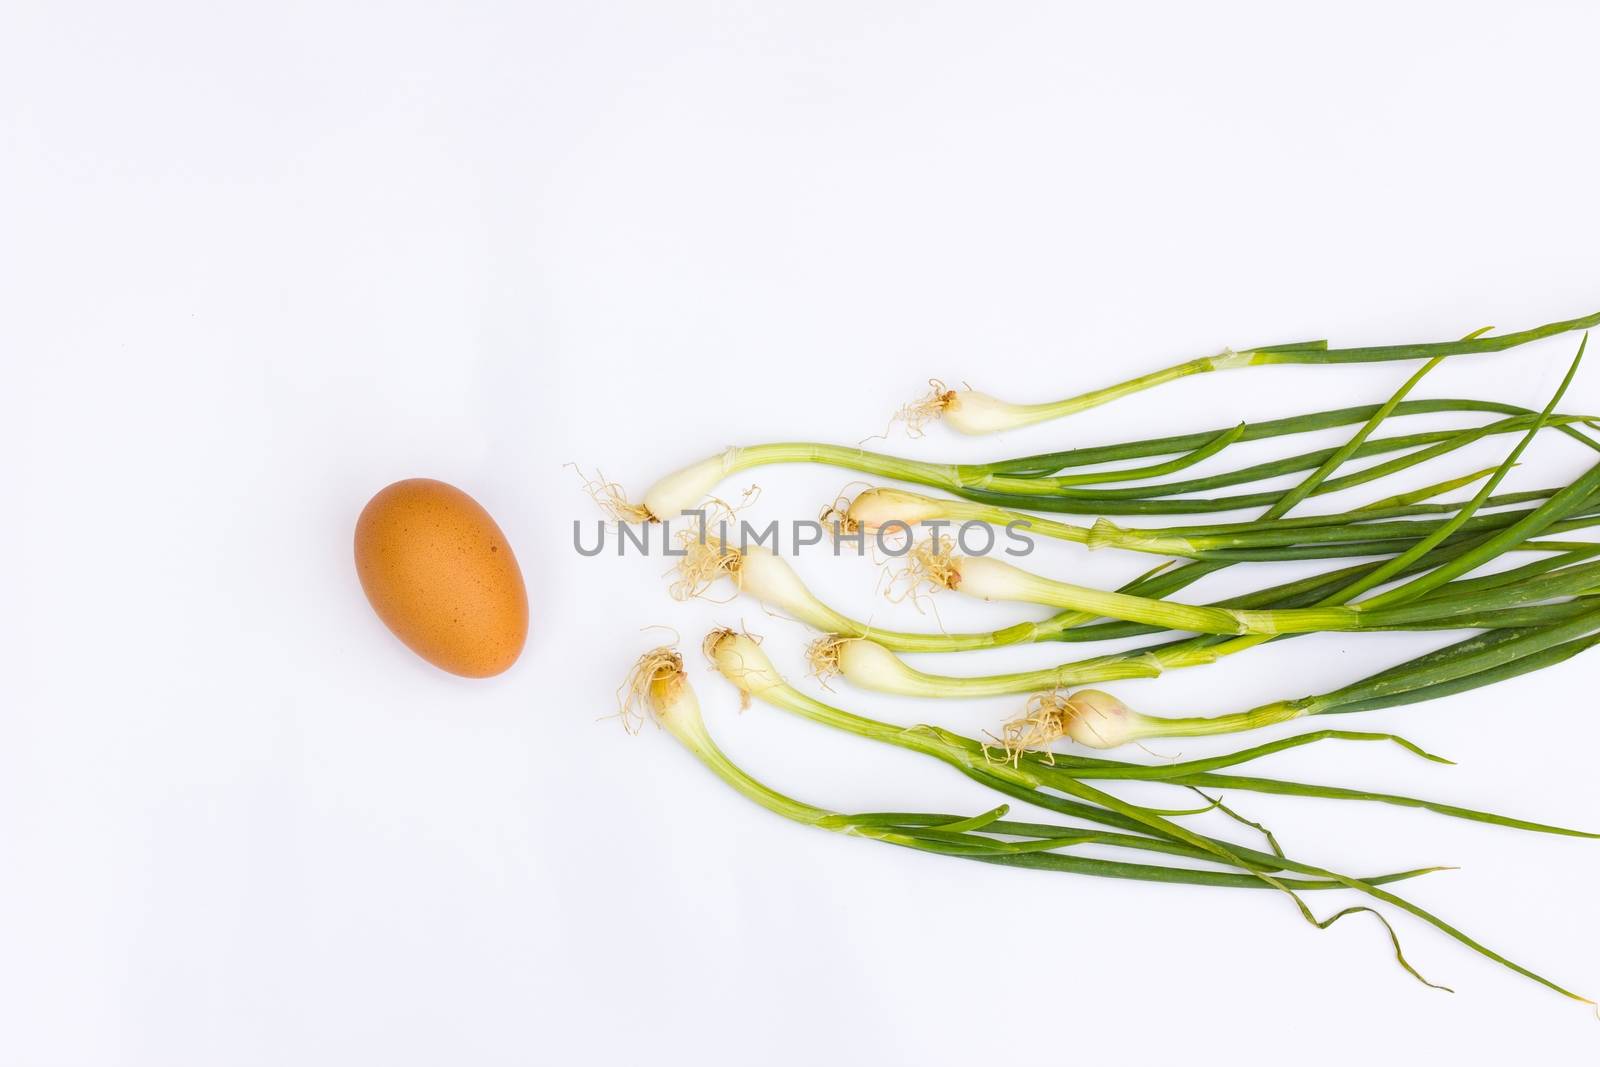 scallions and egg isolated on white background, concept fertilis by a3701027